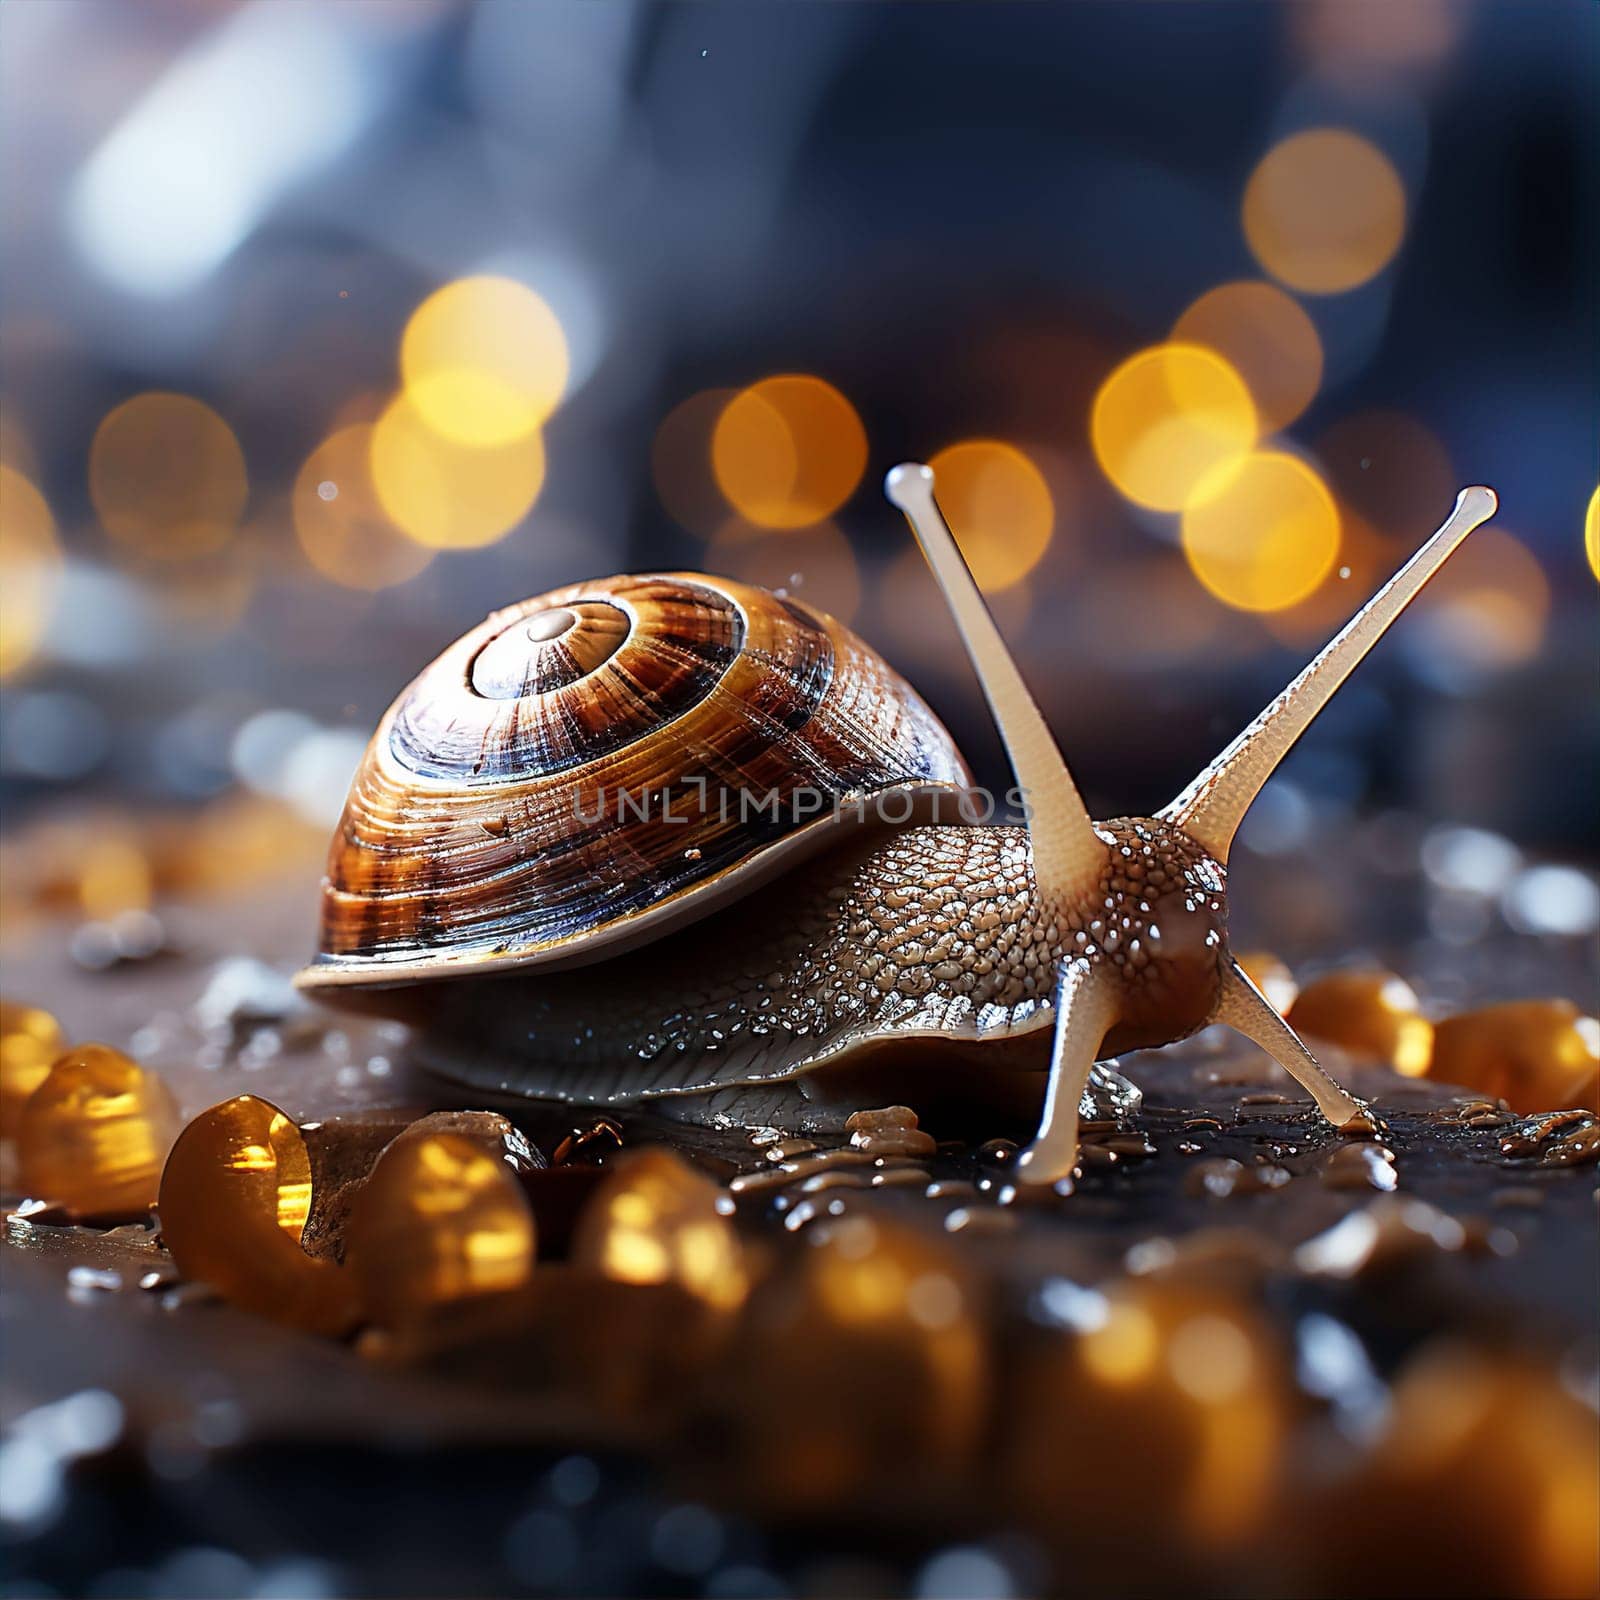 Snail with shell on road in city at night by kuprevich